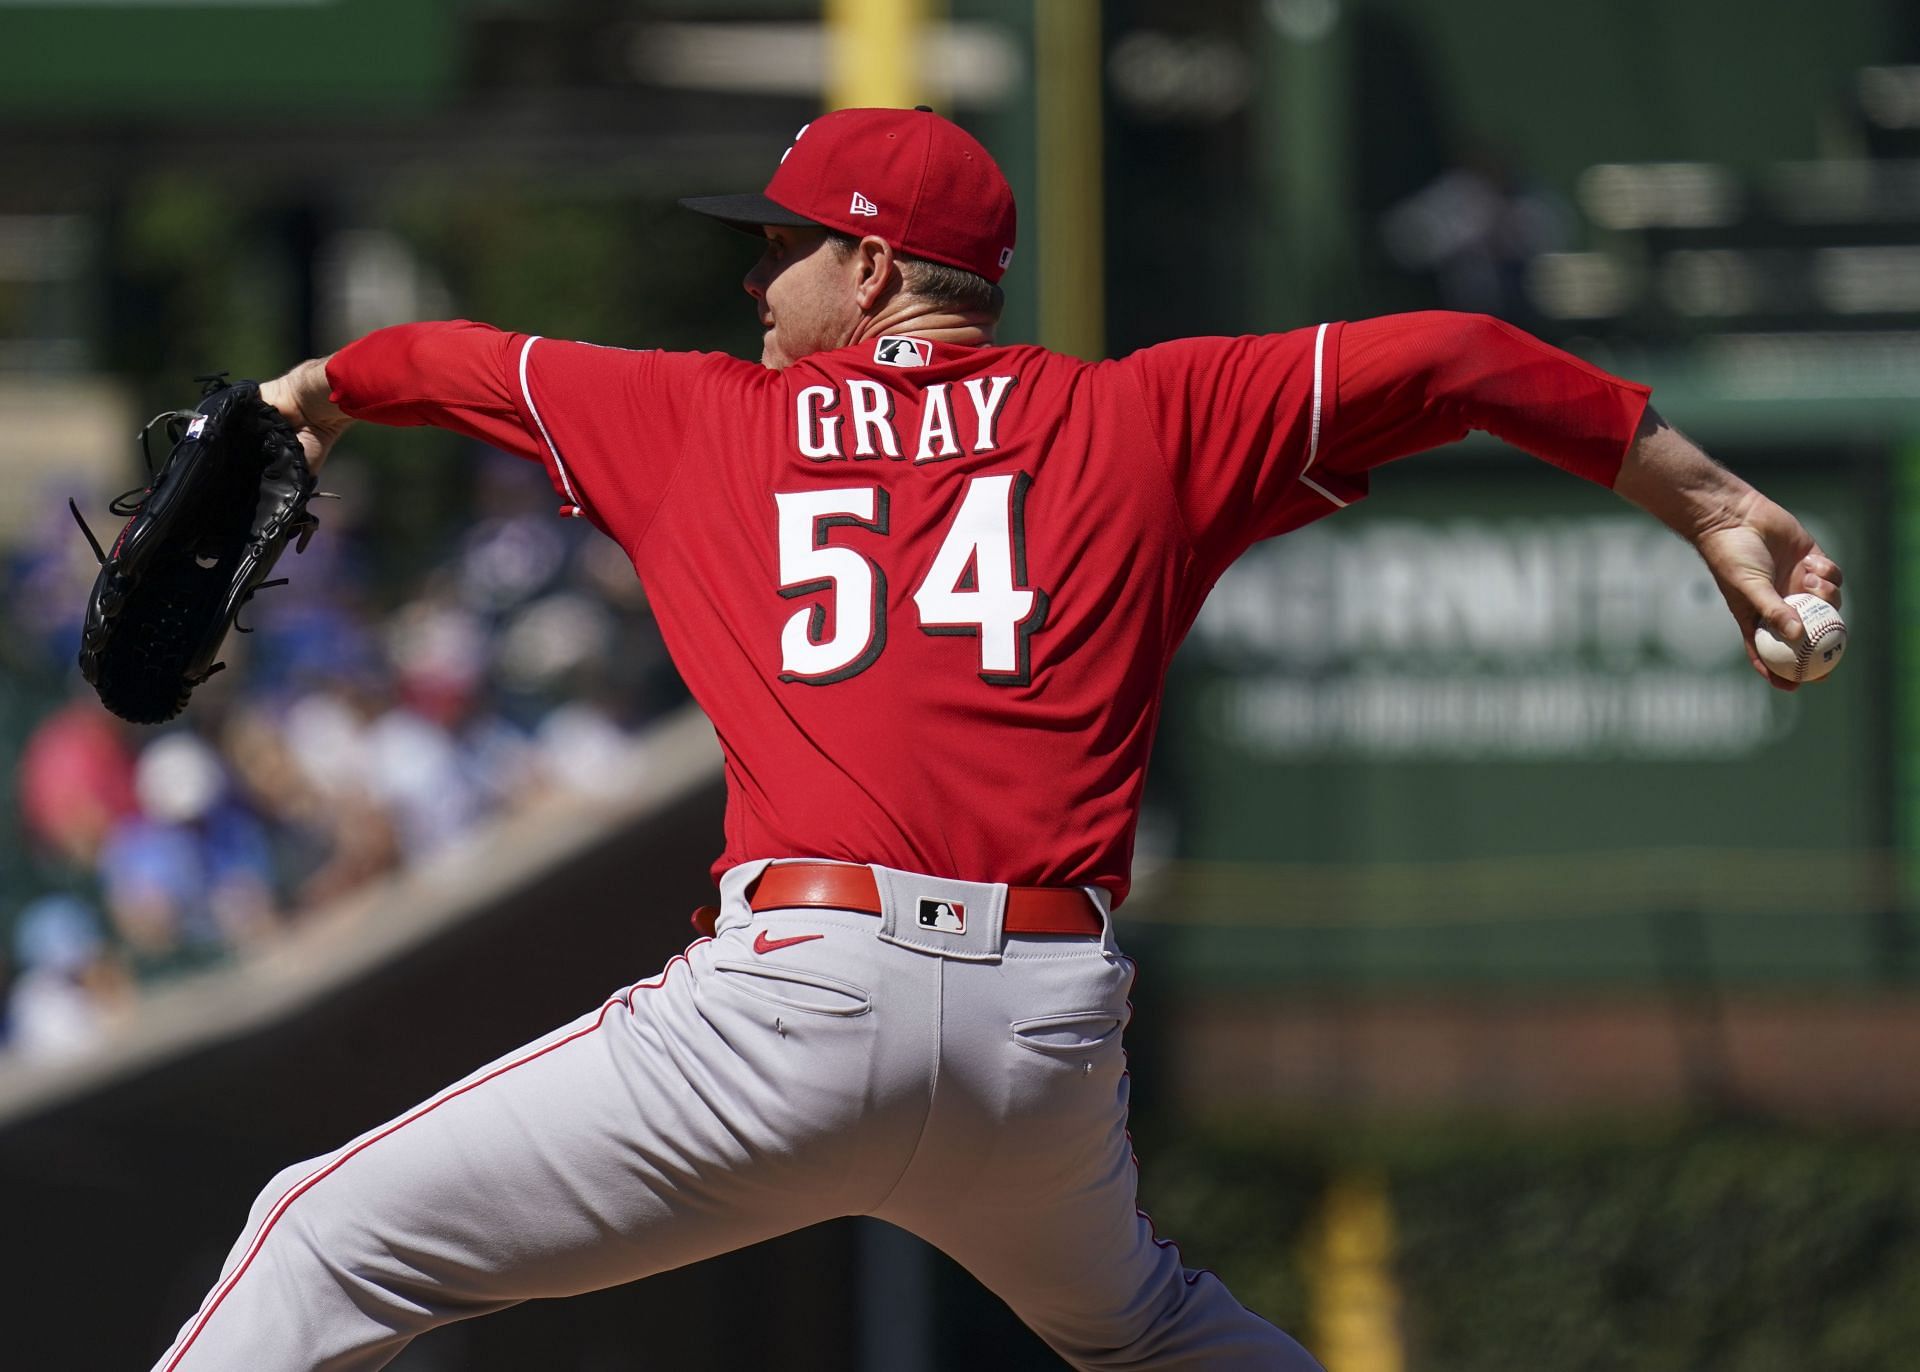 Sonny Gray is a very underrated name in Baseball